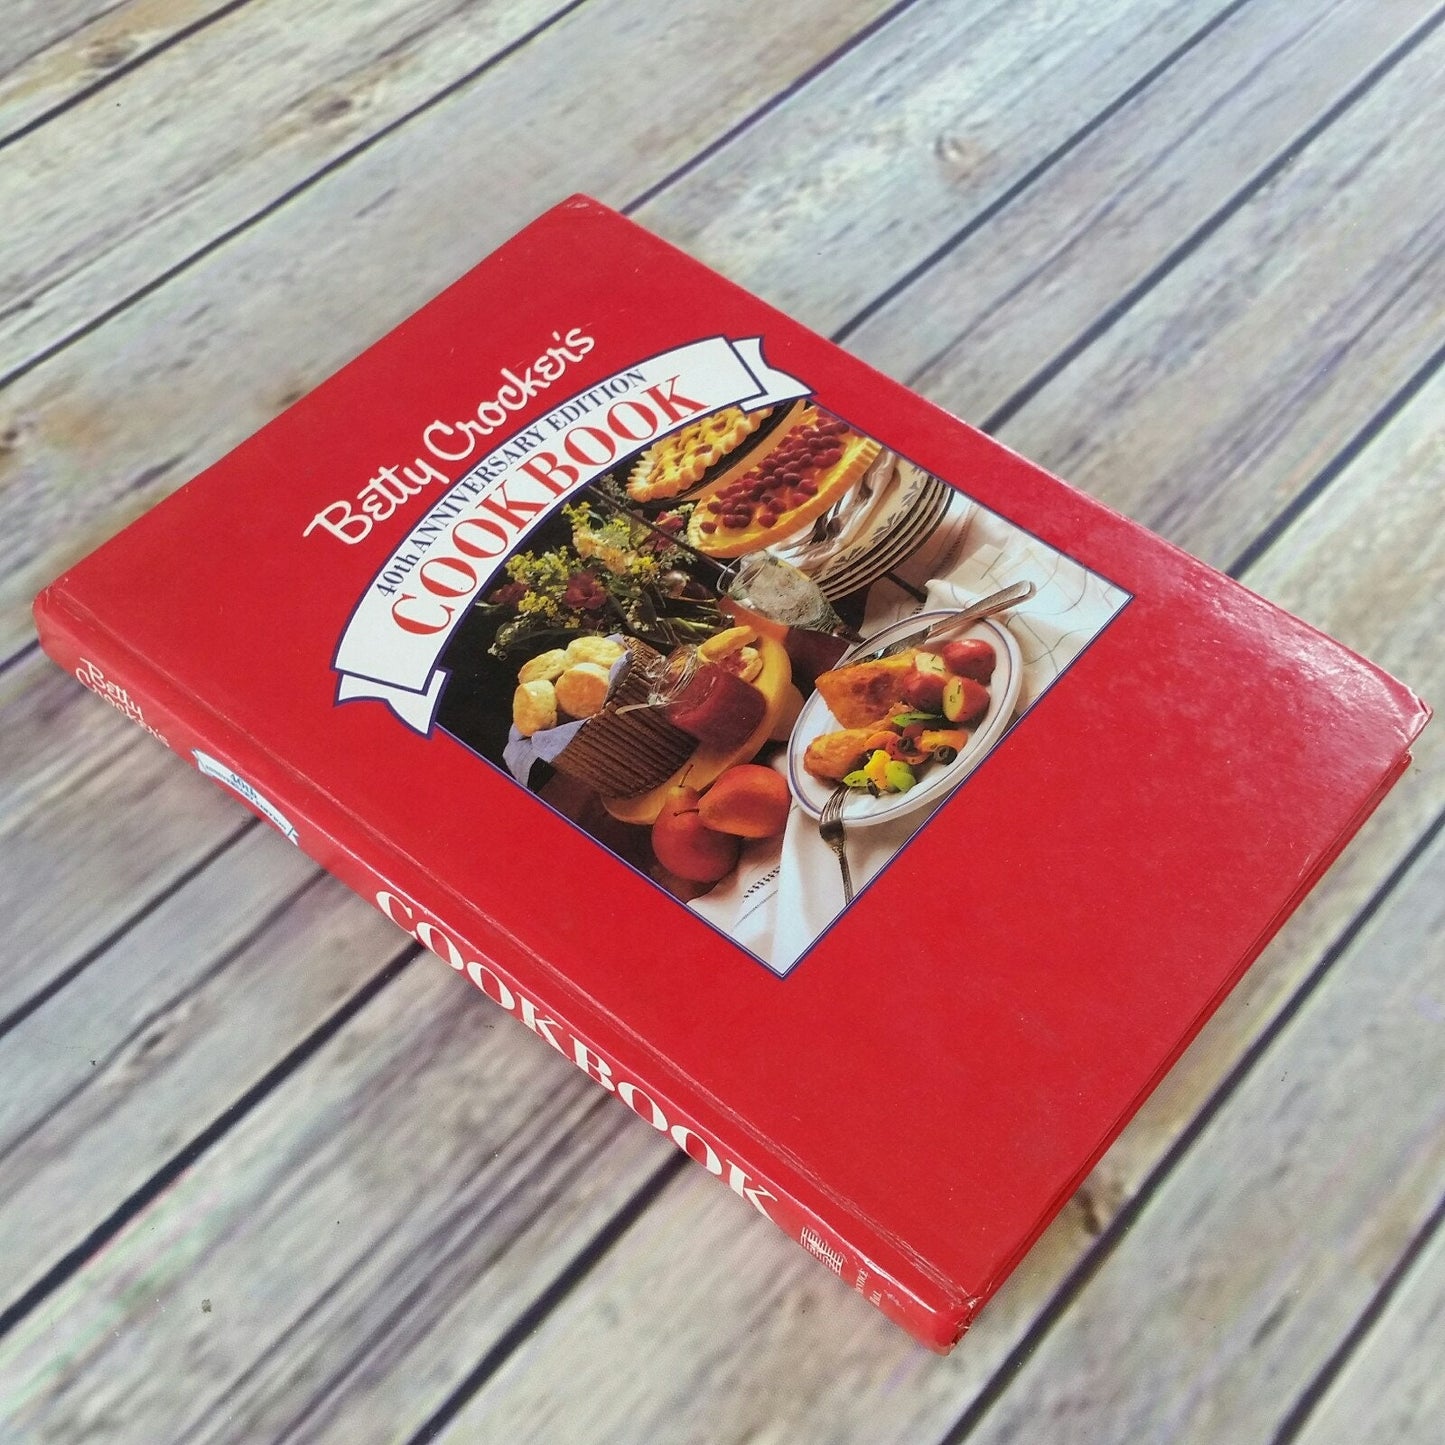 Vintage Cookbook Betty Crocker Red Cover 1991 40th Anniversary Recipes Cook Book Hardcover